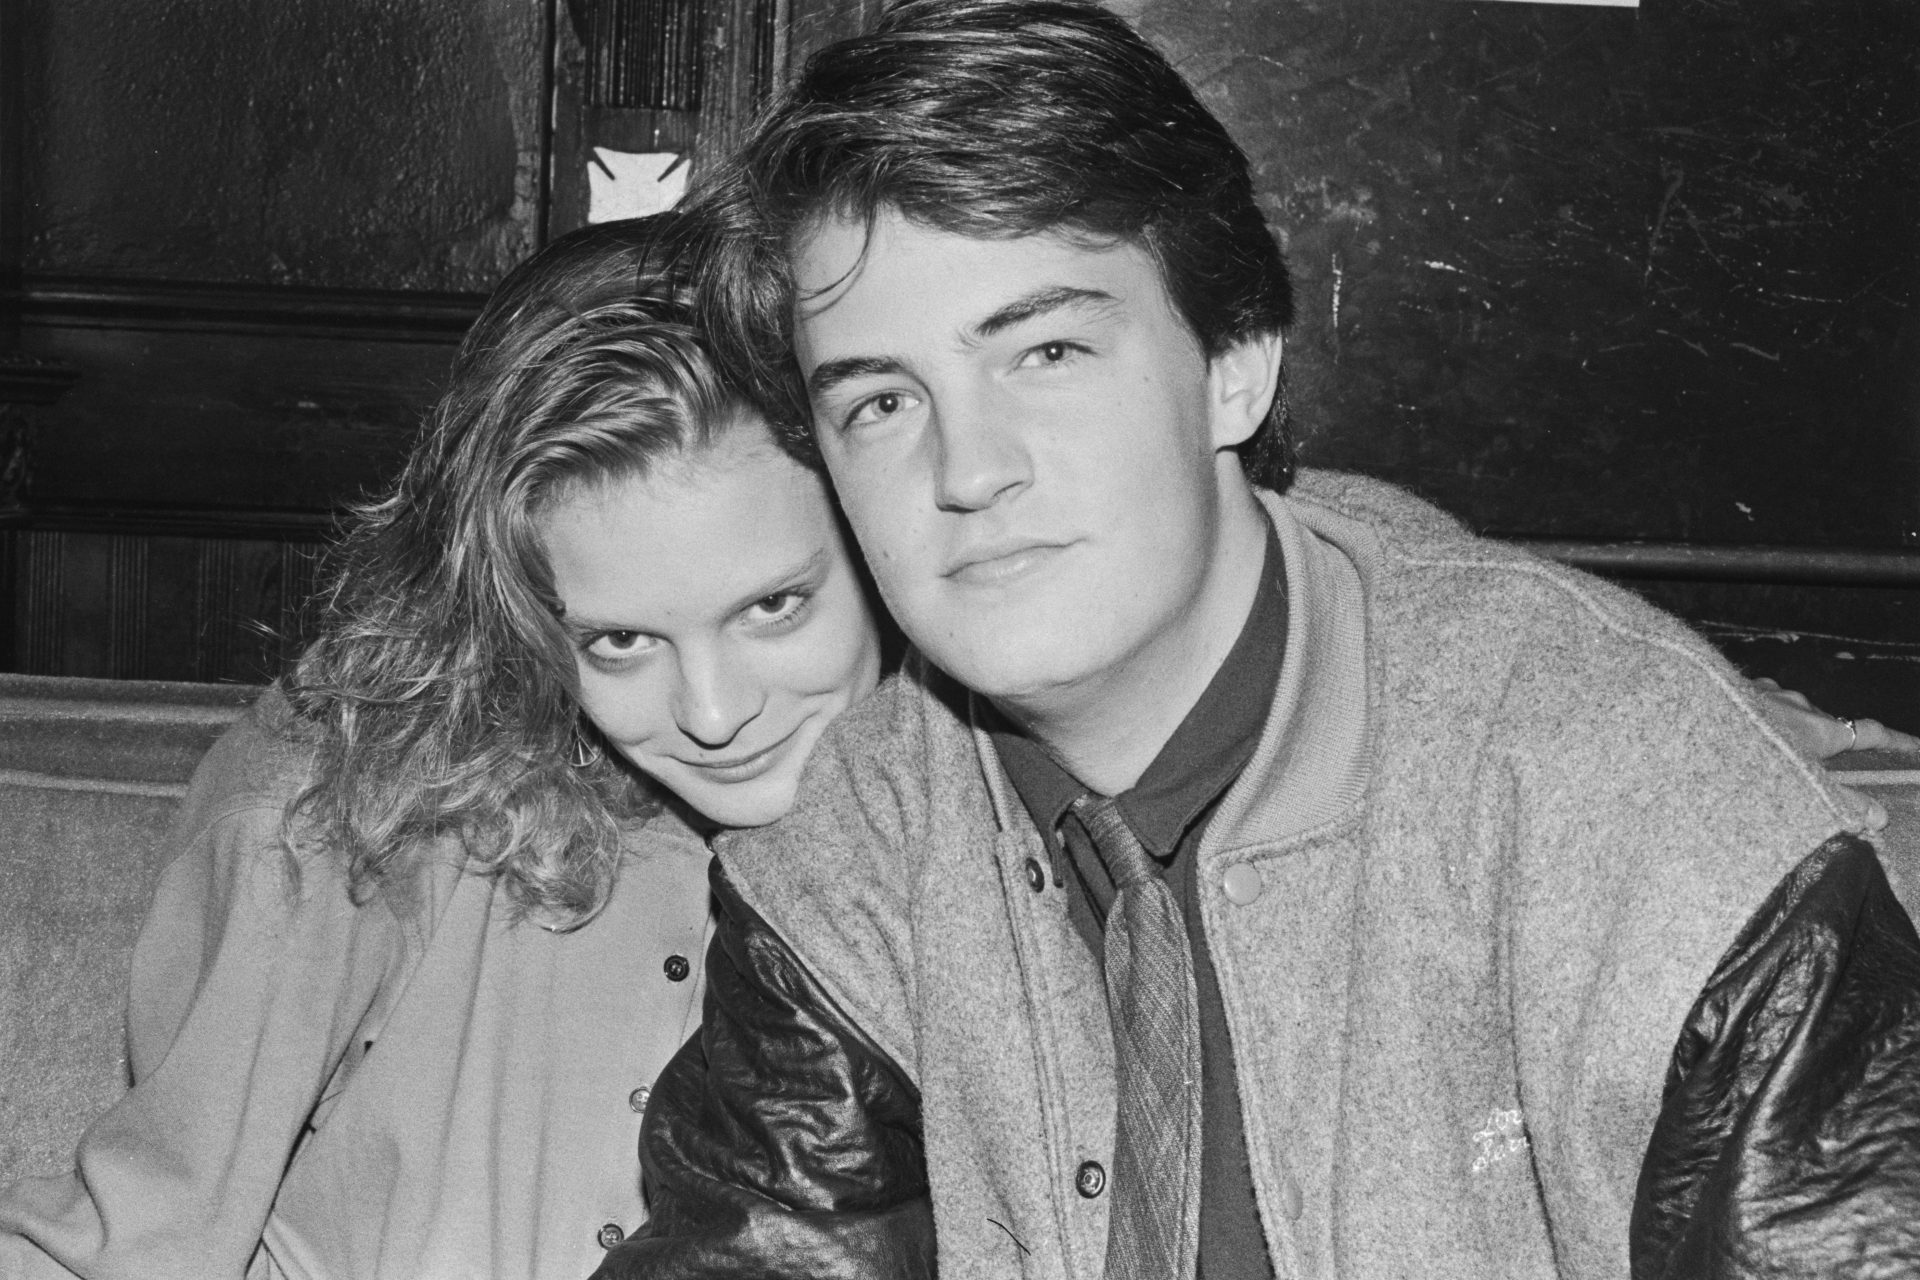 At the age of 15, Matthew Perry moved to Los Angeles